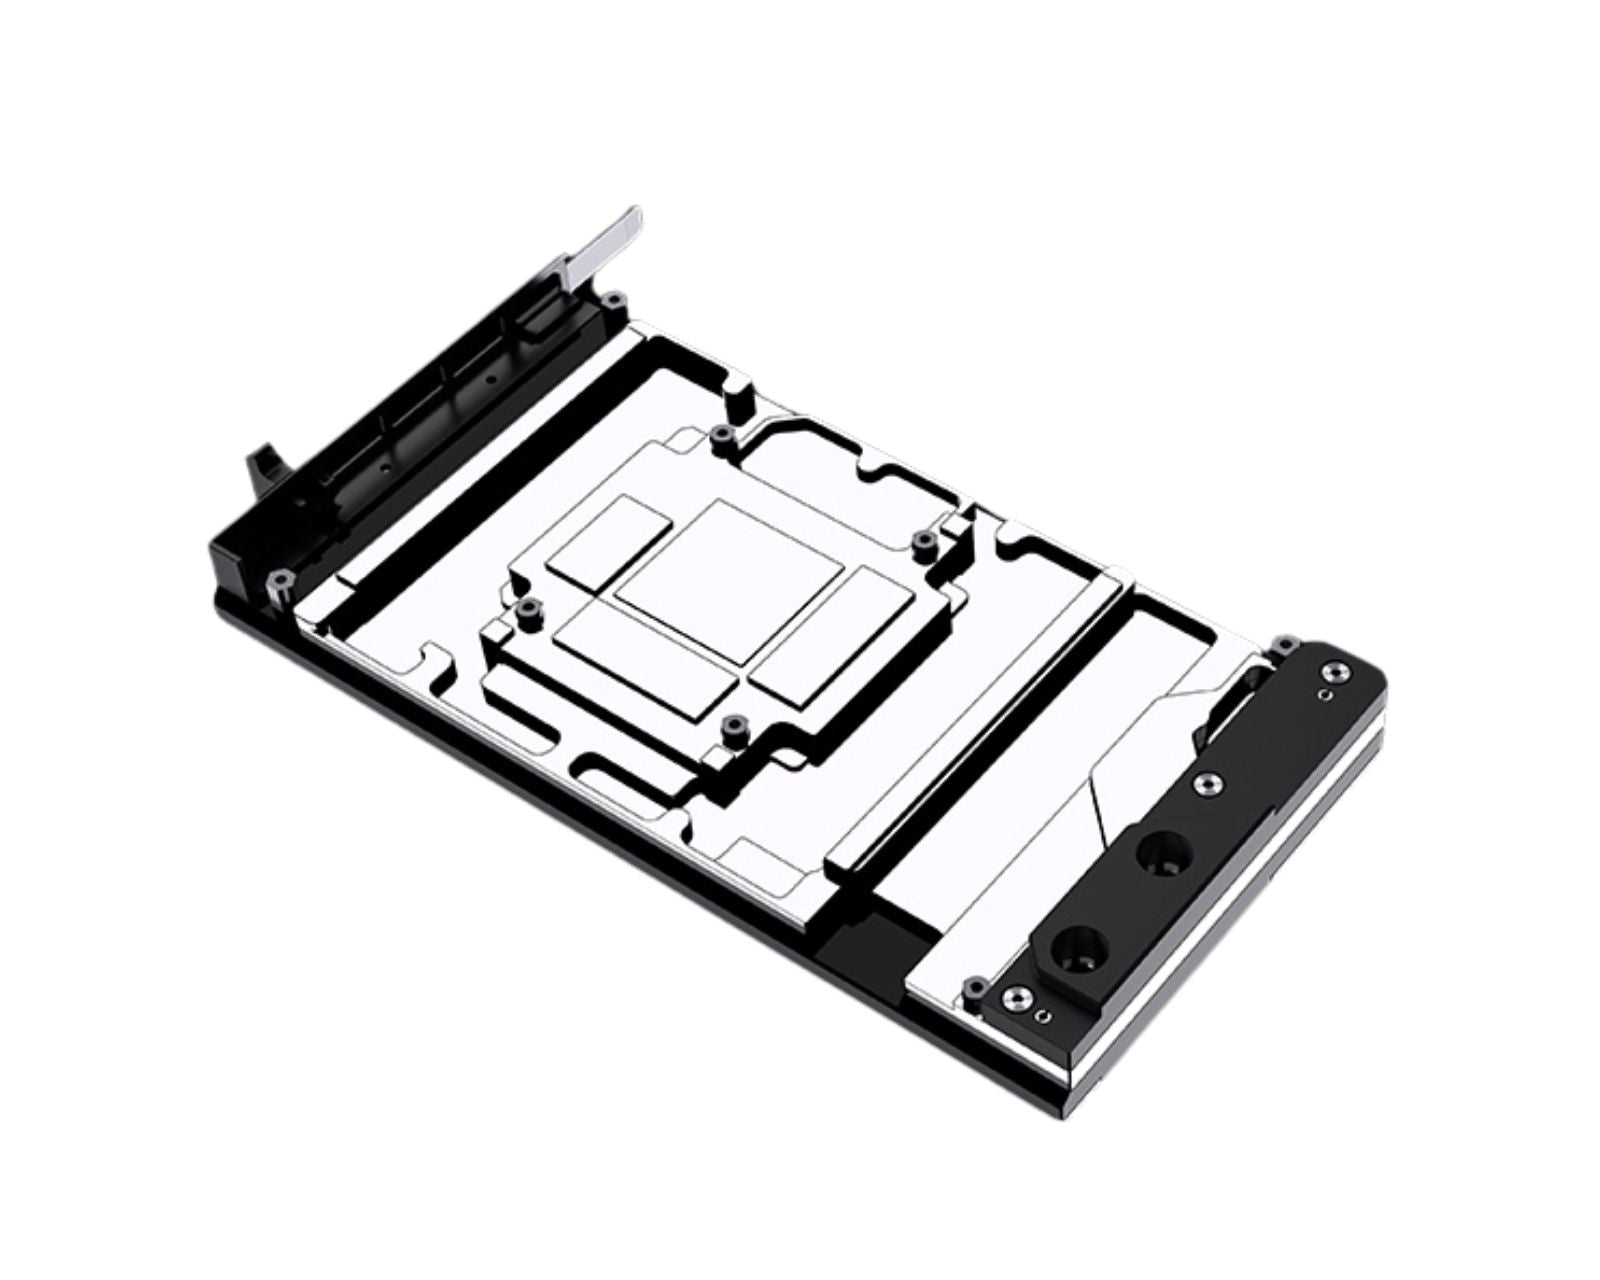 Granzon Full Armor GPU Water Block and Backplate For Colorful iGame RTX 4080 16GB Ultra W OC (GBN-IG4080ULOC)